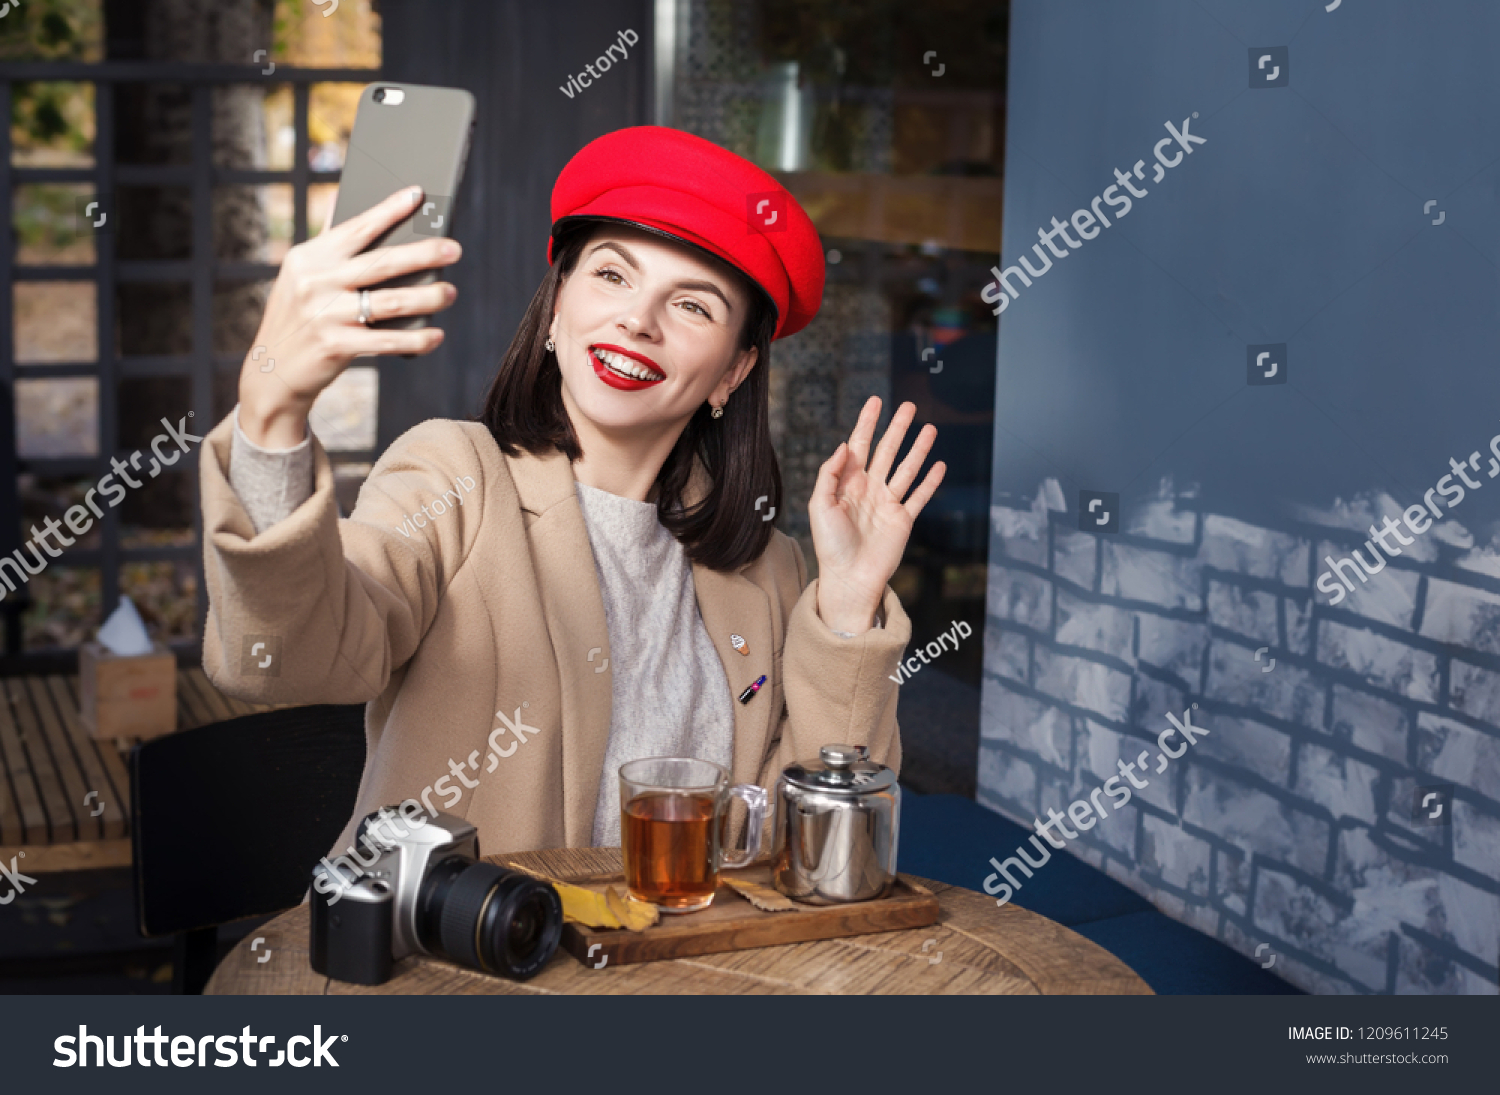 Beautiful smiling girl sitting in a cafe and using a smartphone #1209611245